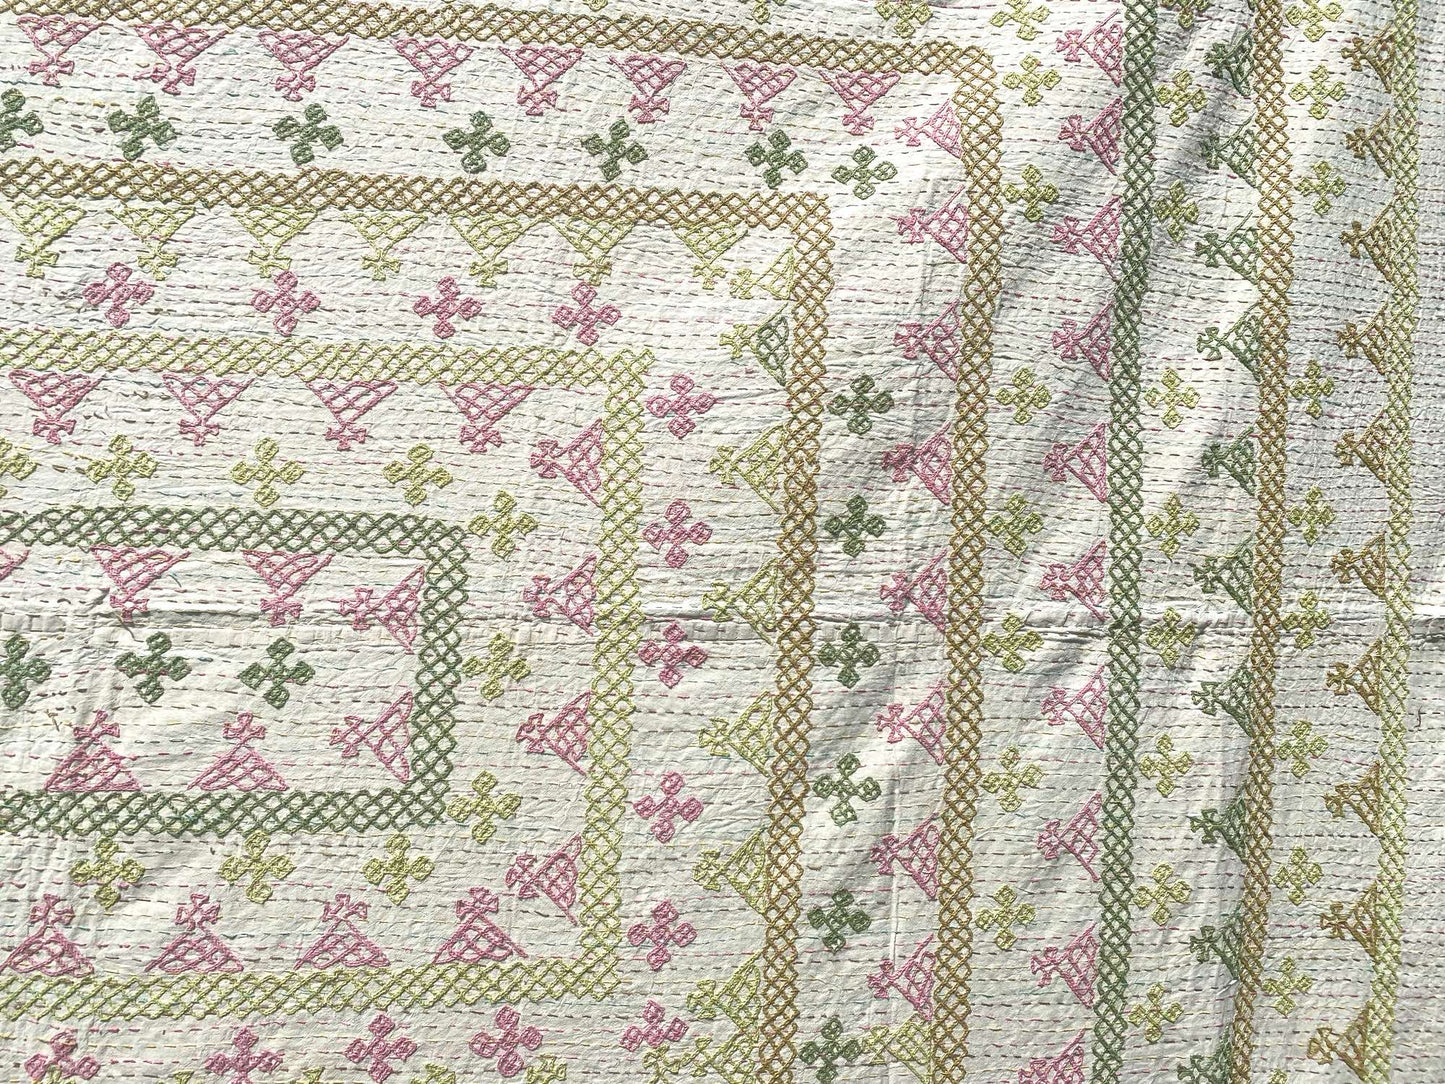 Huramchi pink and green quilt